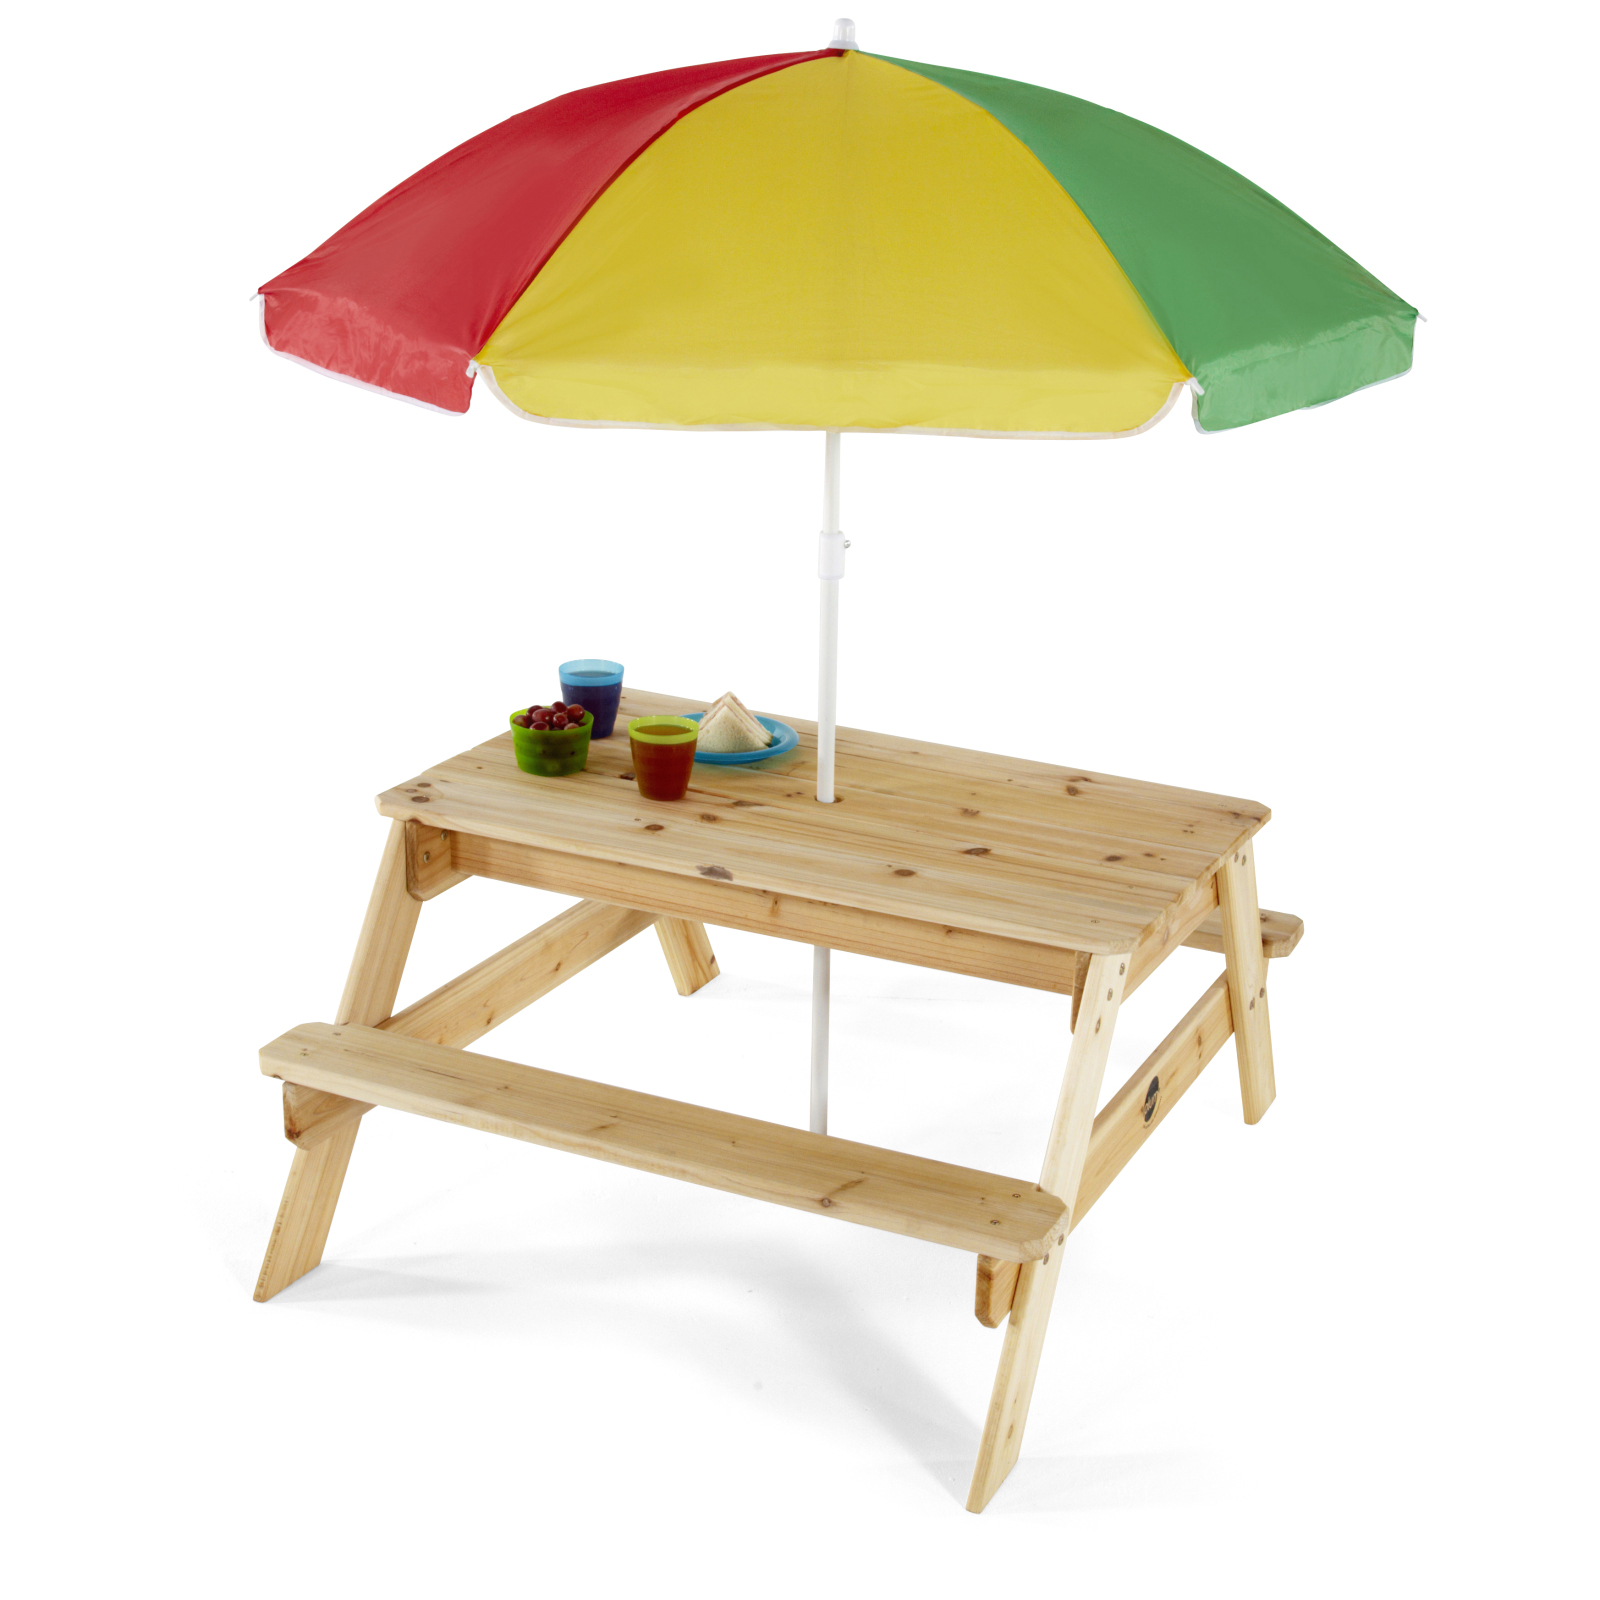 Plum Play Wooden Picnic Table with Parasol - image 1 of 6